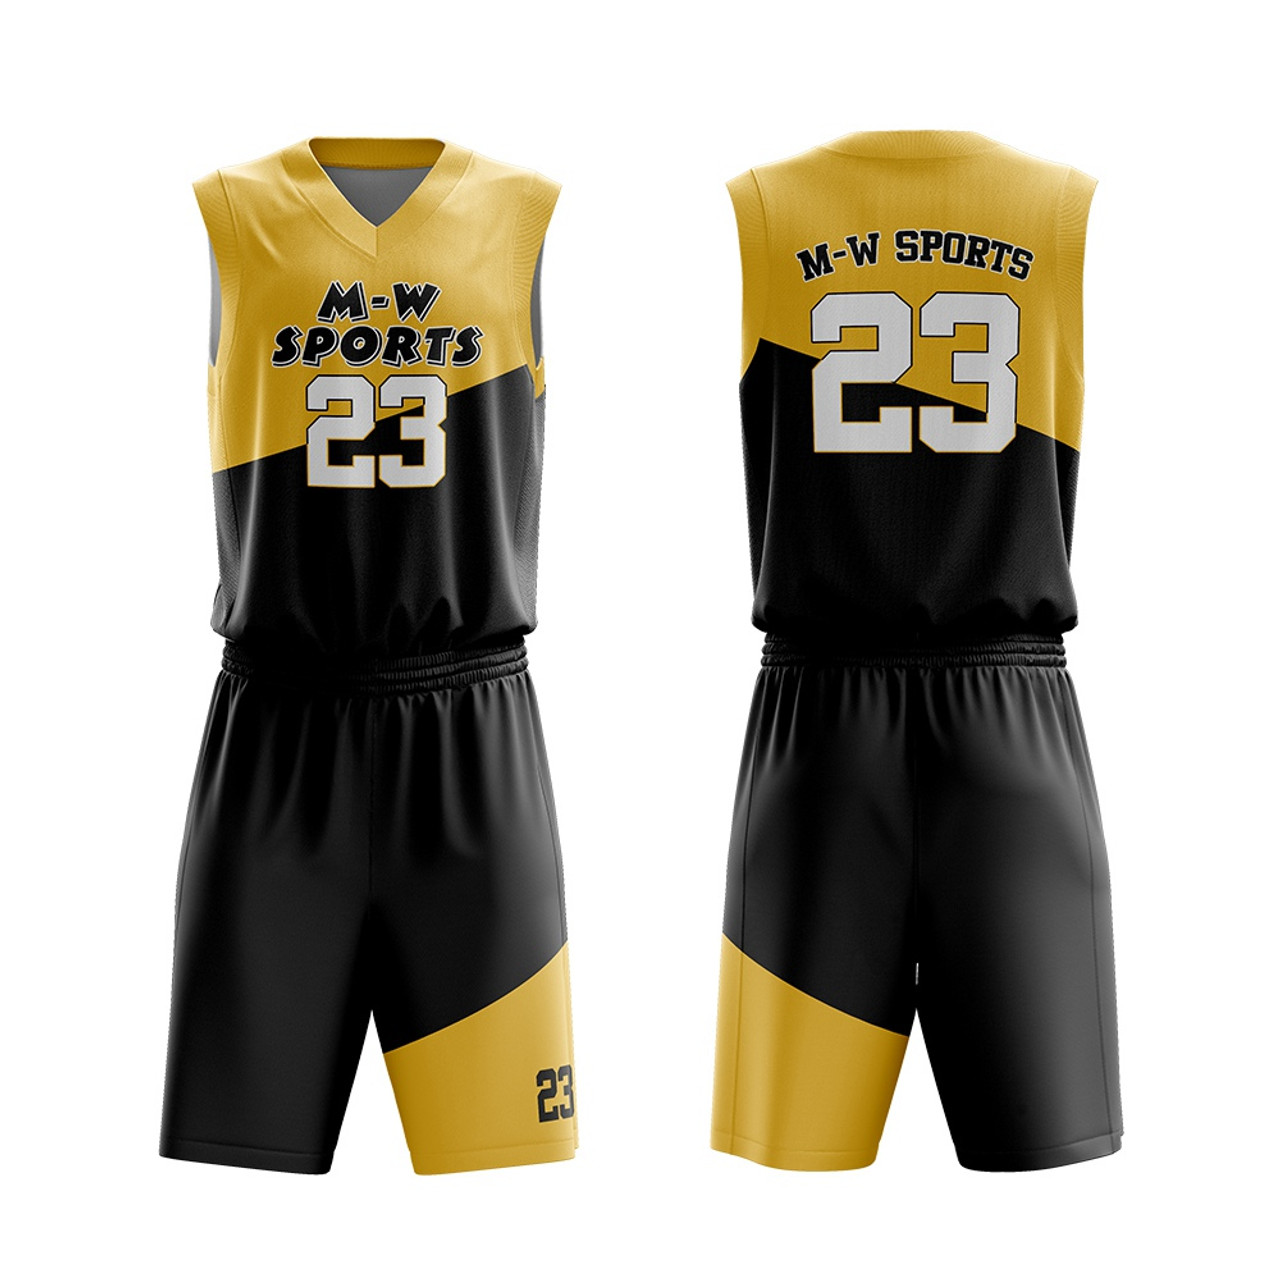 Basketball Jersey Uniform Design Color Yellow New Style Customized